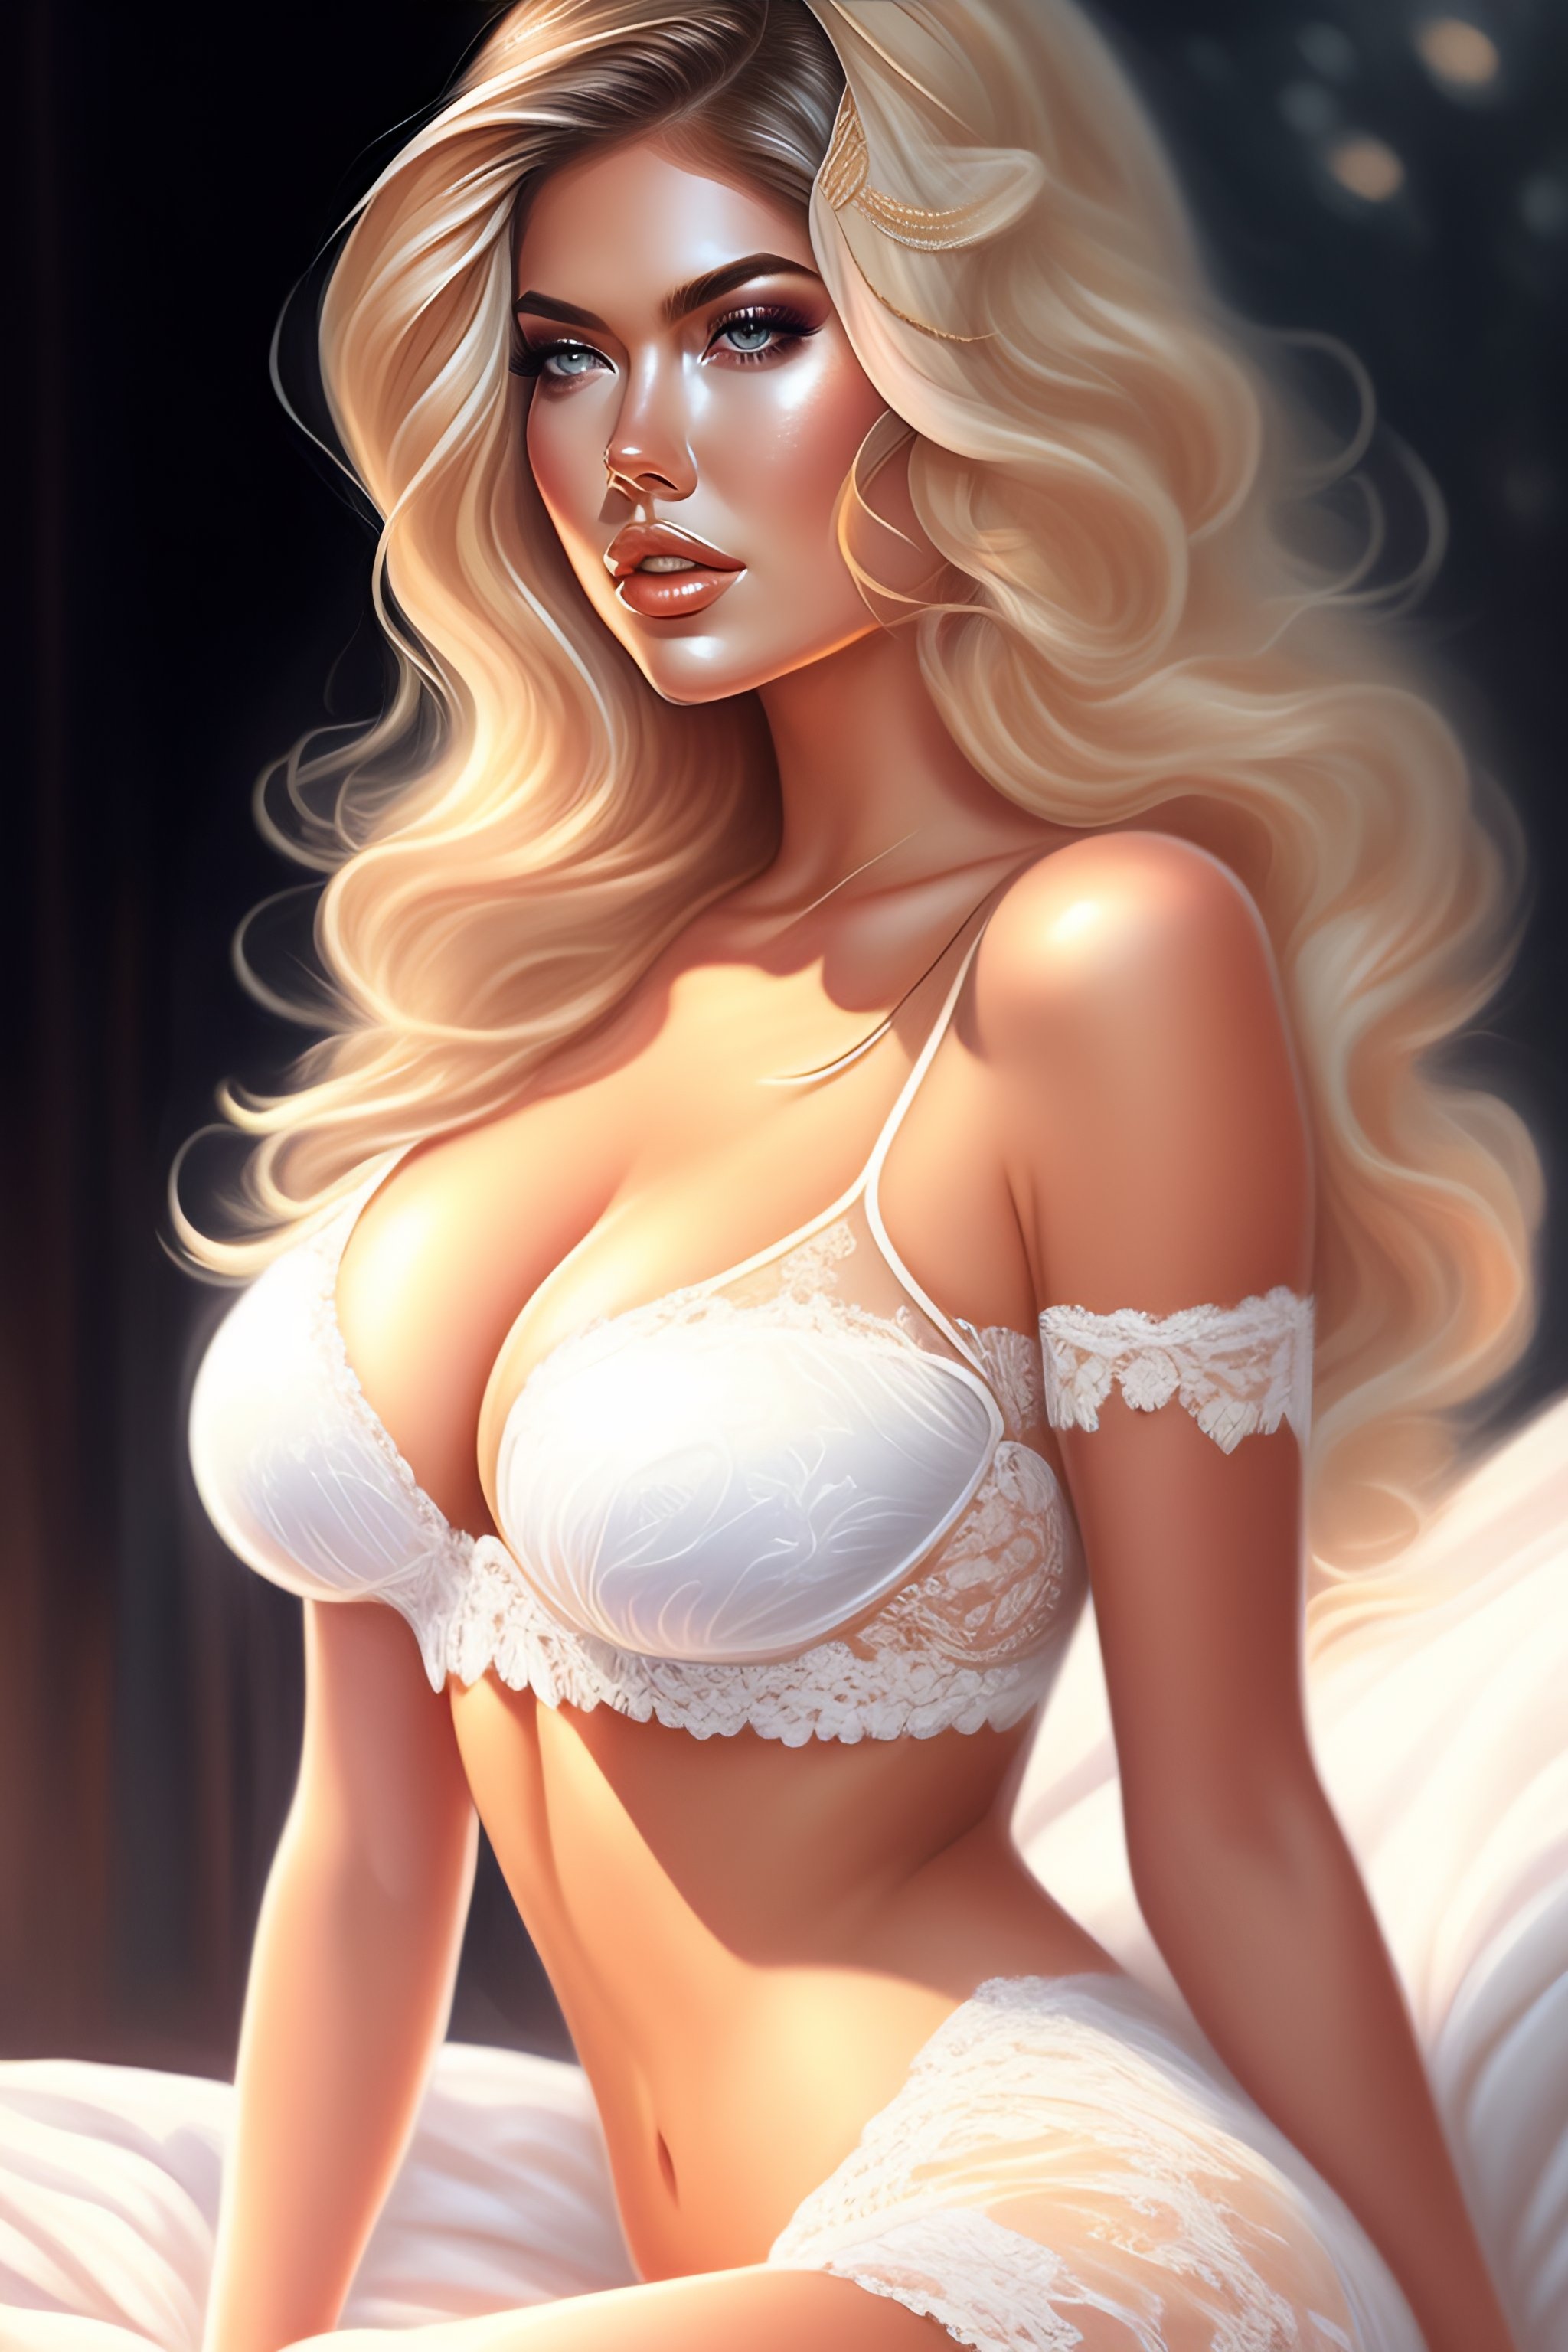 Lexica - Full body, 2D digital painting of Kate Upton, wearing white lace  outfit, crouching in a bed, full intimate setting, by artgerm lau  rossdraws